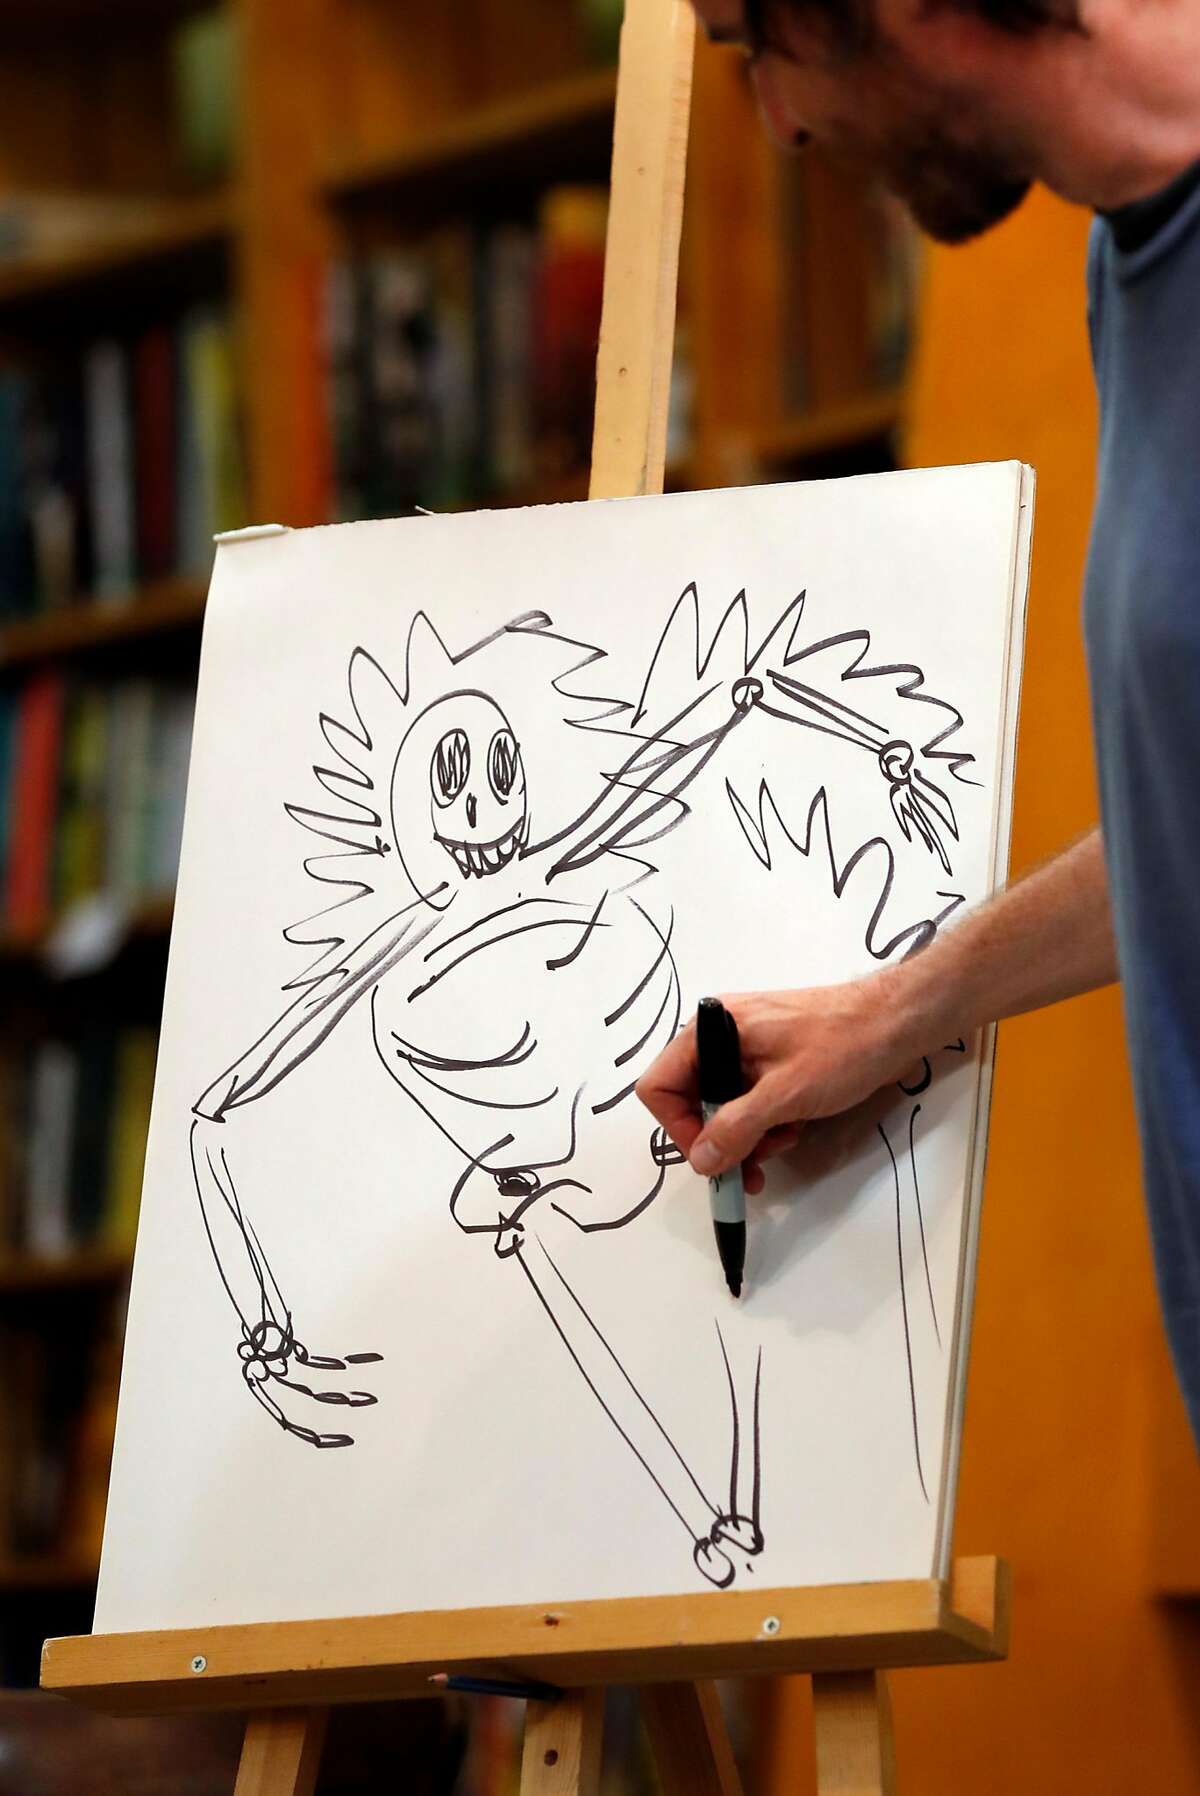 Oakland cartoonist Jason Novak celebrates the release of his book, "Et tu, Brute?" at East Bay Booksellers in Oakland, CA on Wednesday, June13, 2018.